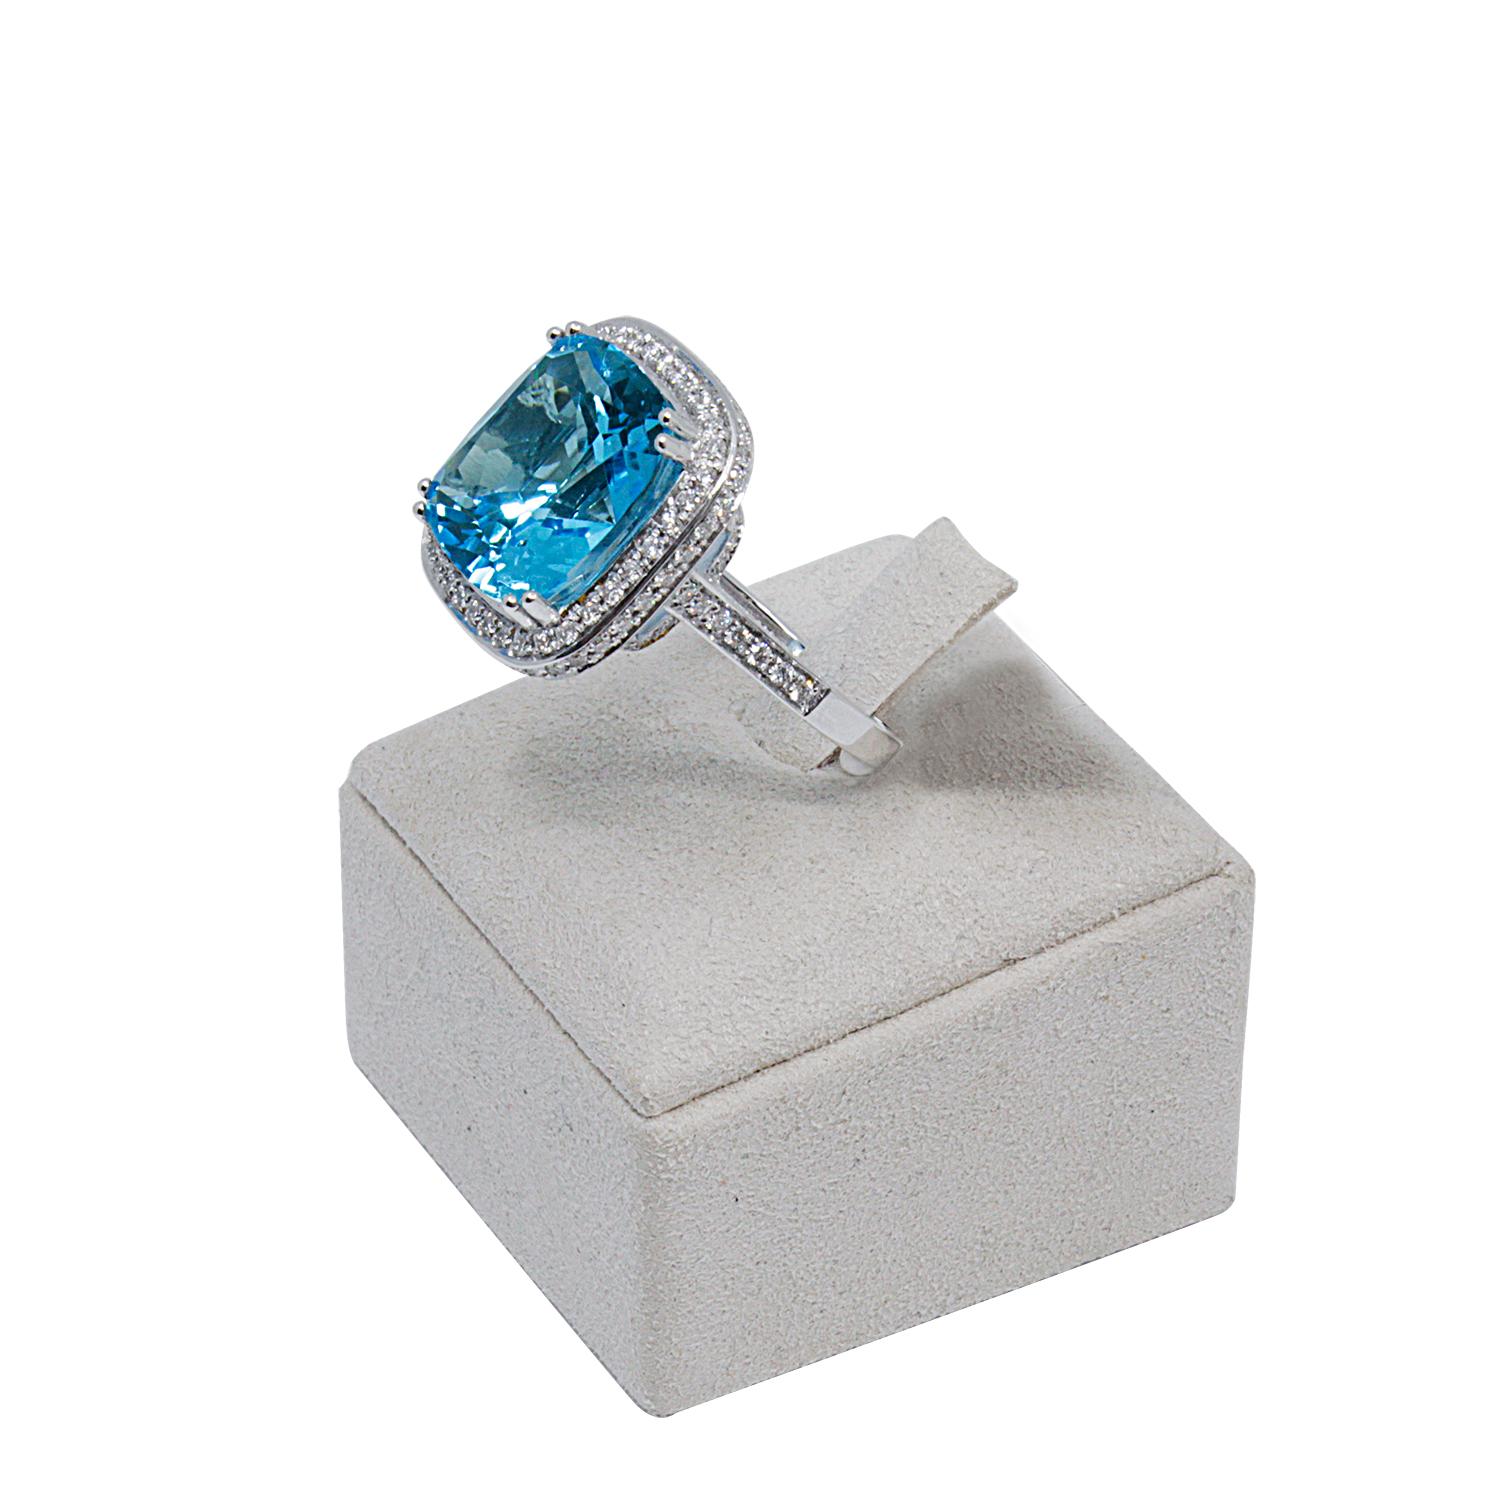 A rhapsody in blue! Gorgeously handcrafted in 18 carat gold this collection is set with a dazzling blue topaz and blue and white diamonds.. 
Description of Gemstones –
White Brilliant Cut Diamonds, total carat weight – 1,05ct ‘F’ Colour ‘VVS1’